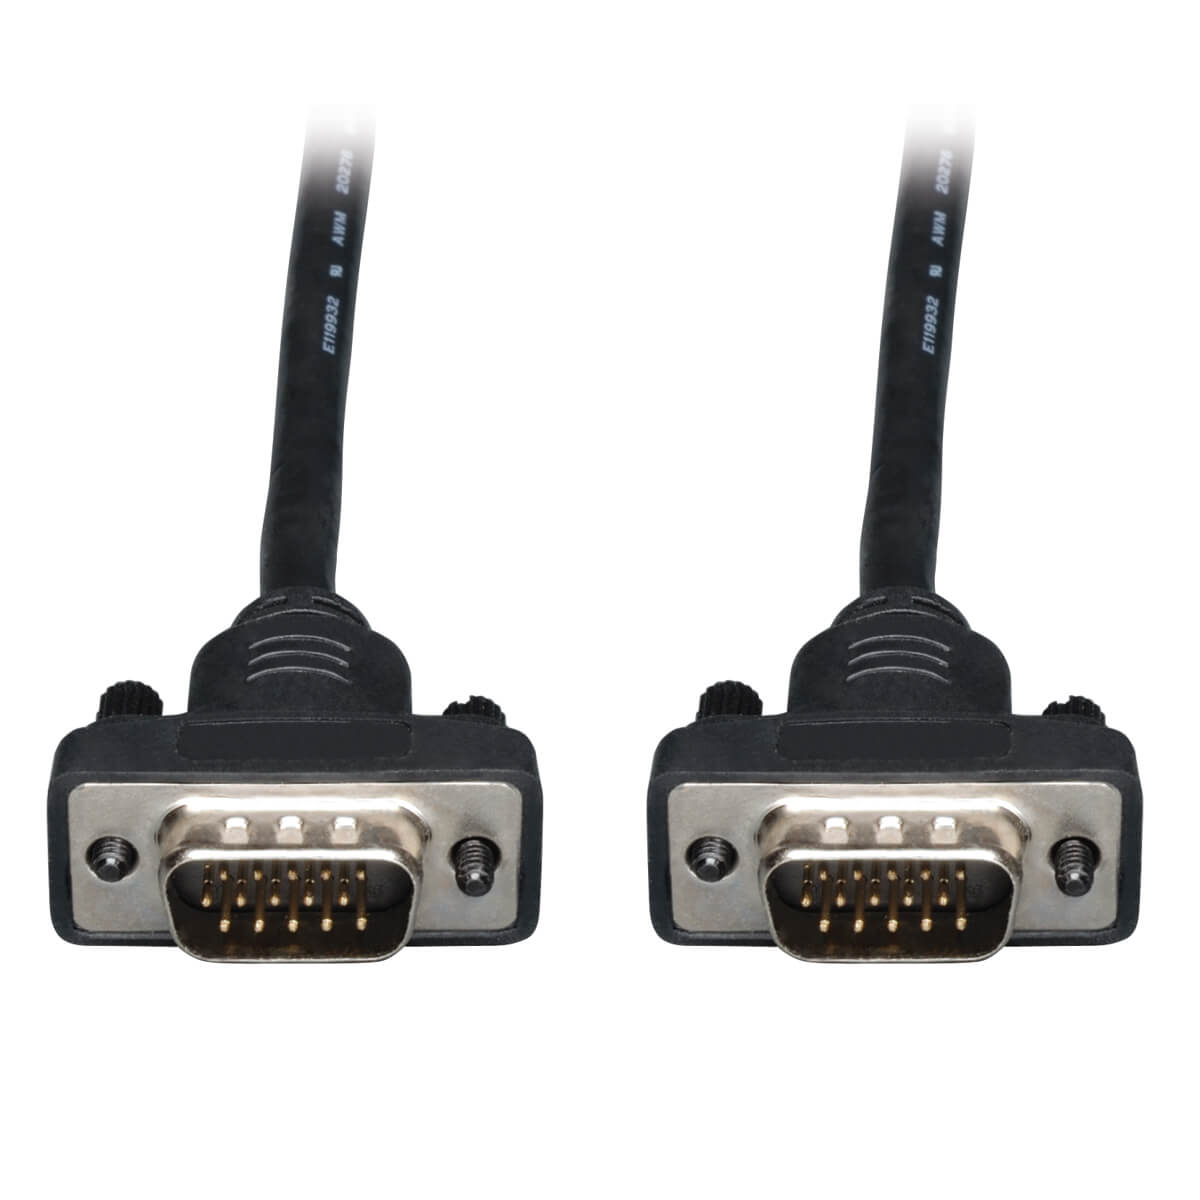 Tripp Lite P512-006 6 ft. VGA Monitor Cable HD-15M to HD-15M Gold Connectors - image 3 of 4